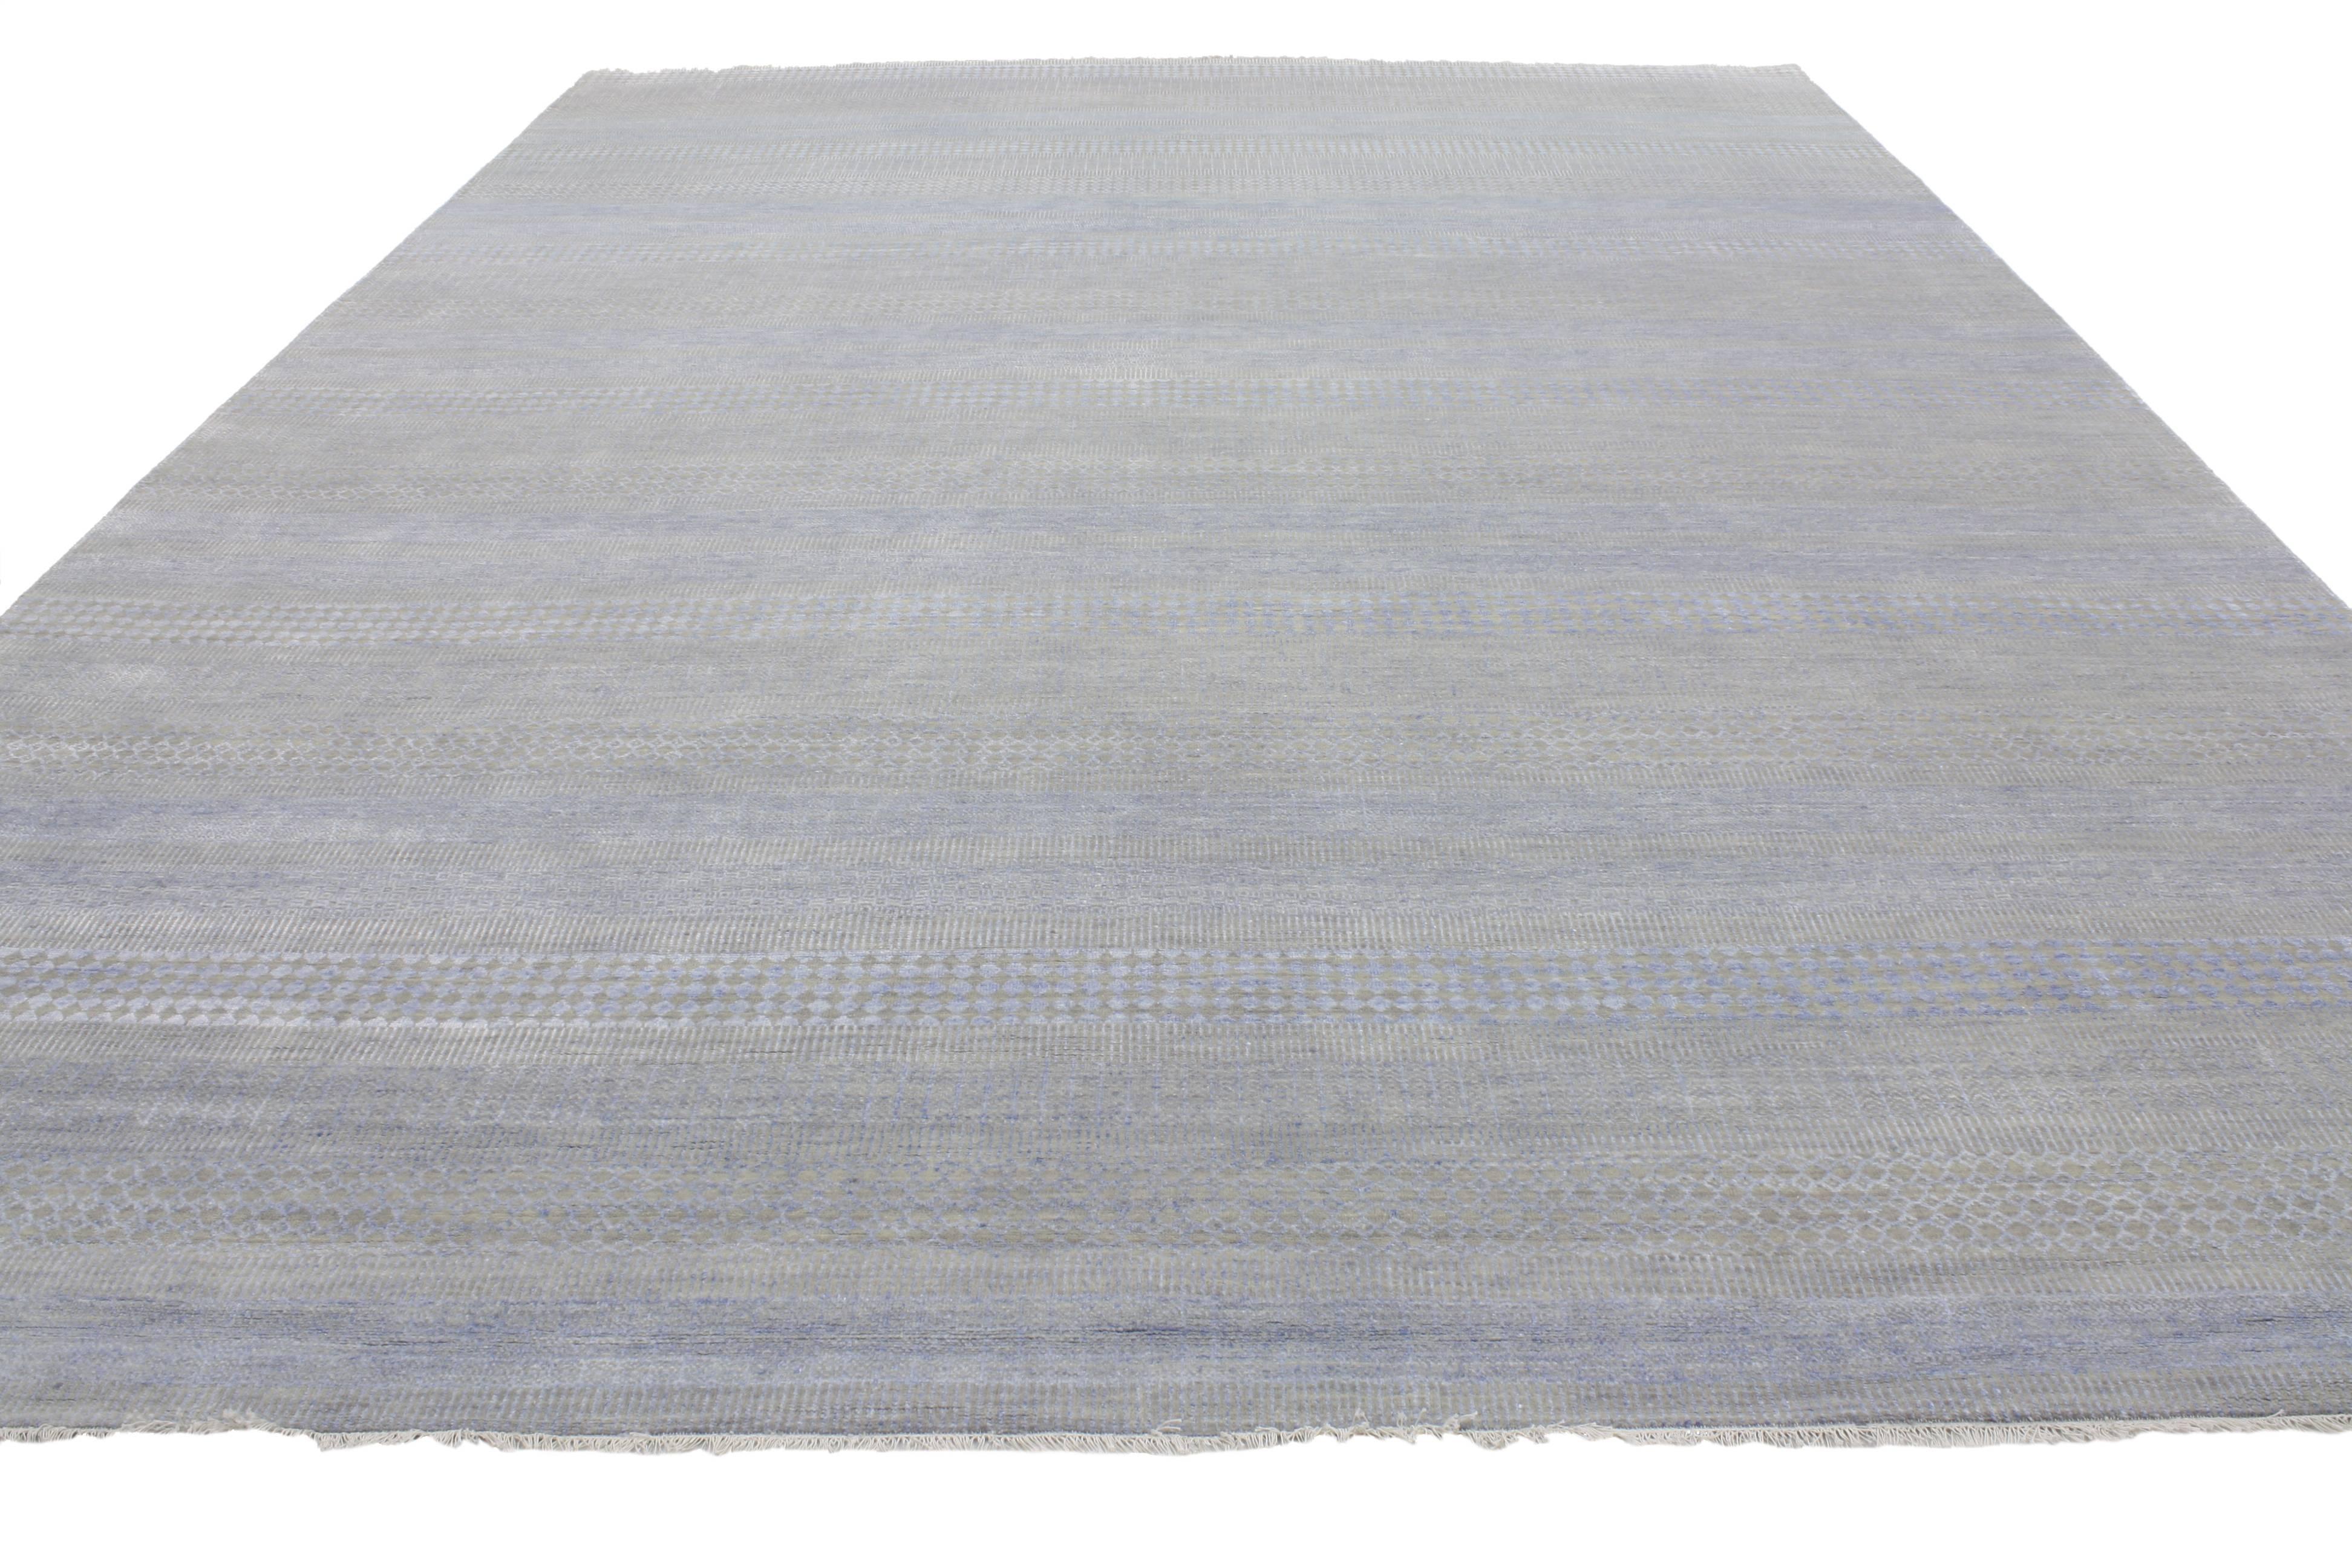 Indian New Modern Transitional Grasscloth Area Rug, Light Gray and Light Blue Area Rug